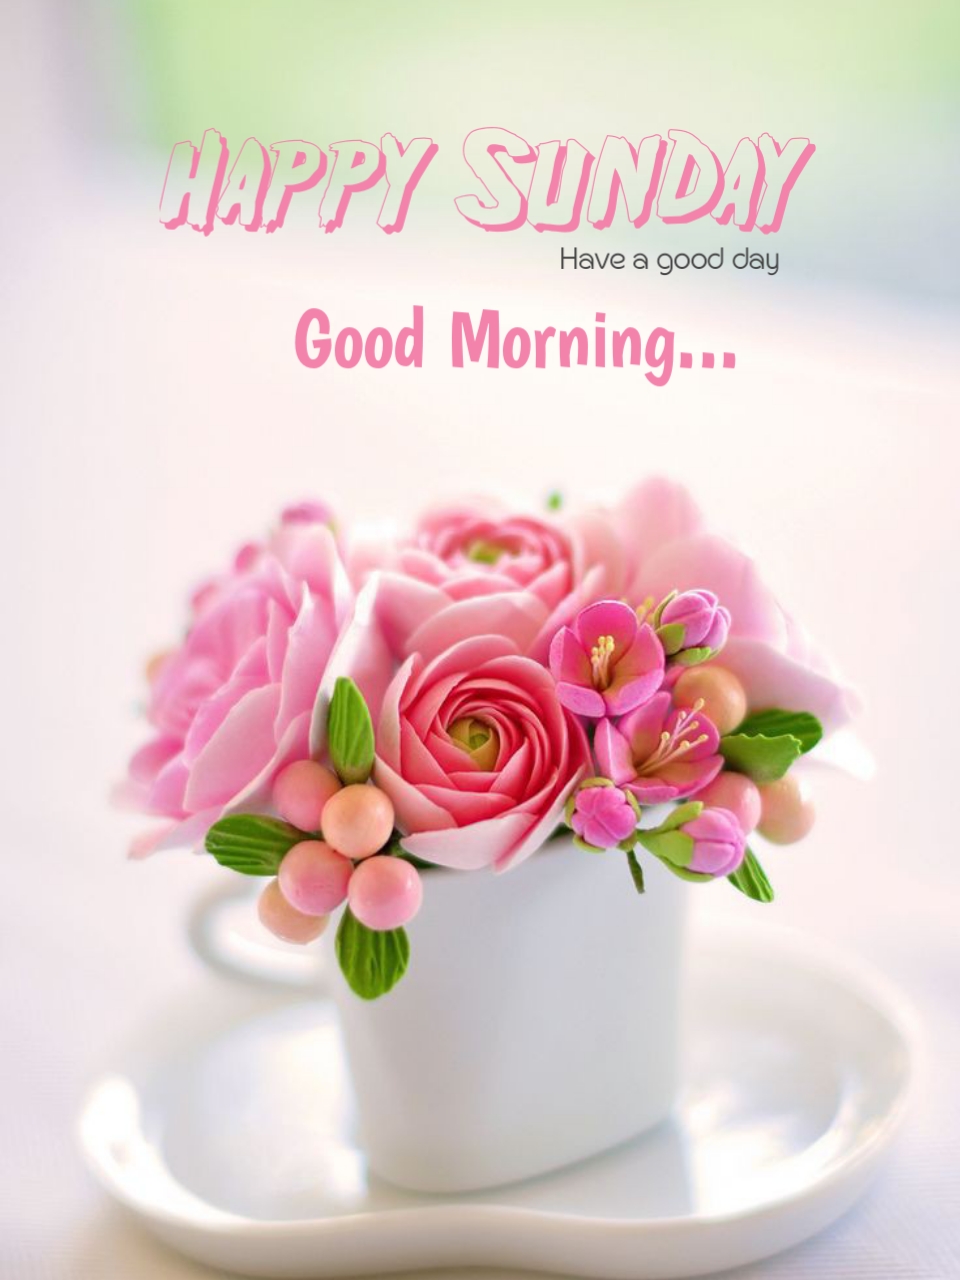 happy sunday wishes to loved ones